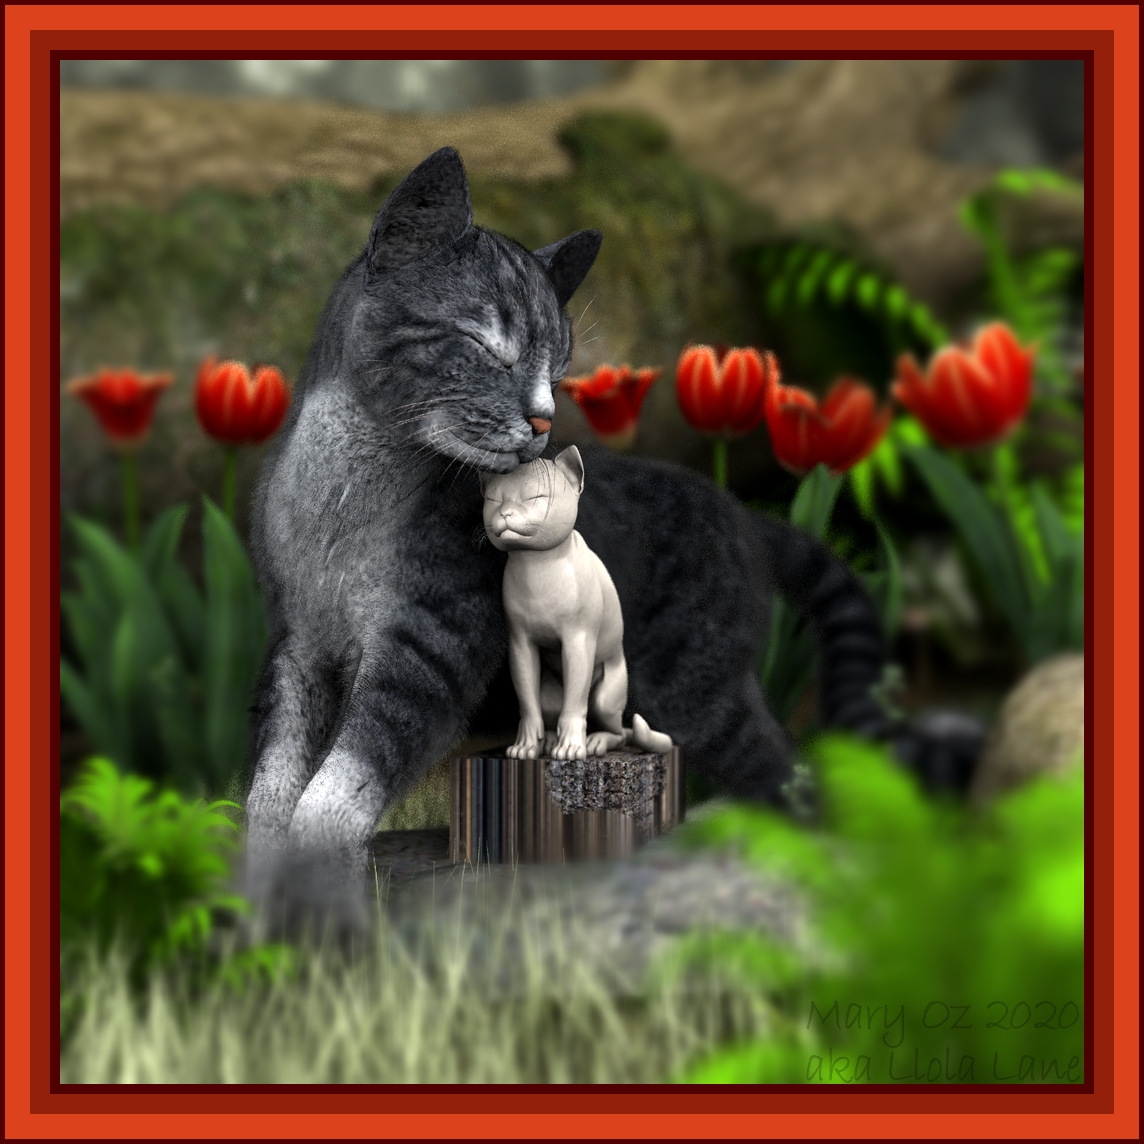 STAY HOME catStatue wLAMH preset 22minute render 1024x1024 DONE SIGN.jpg